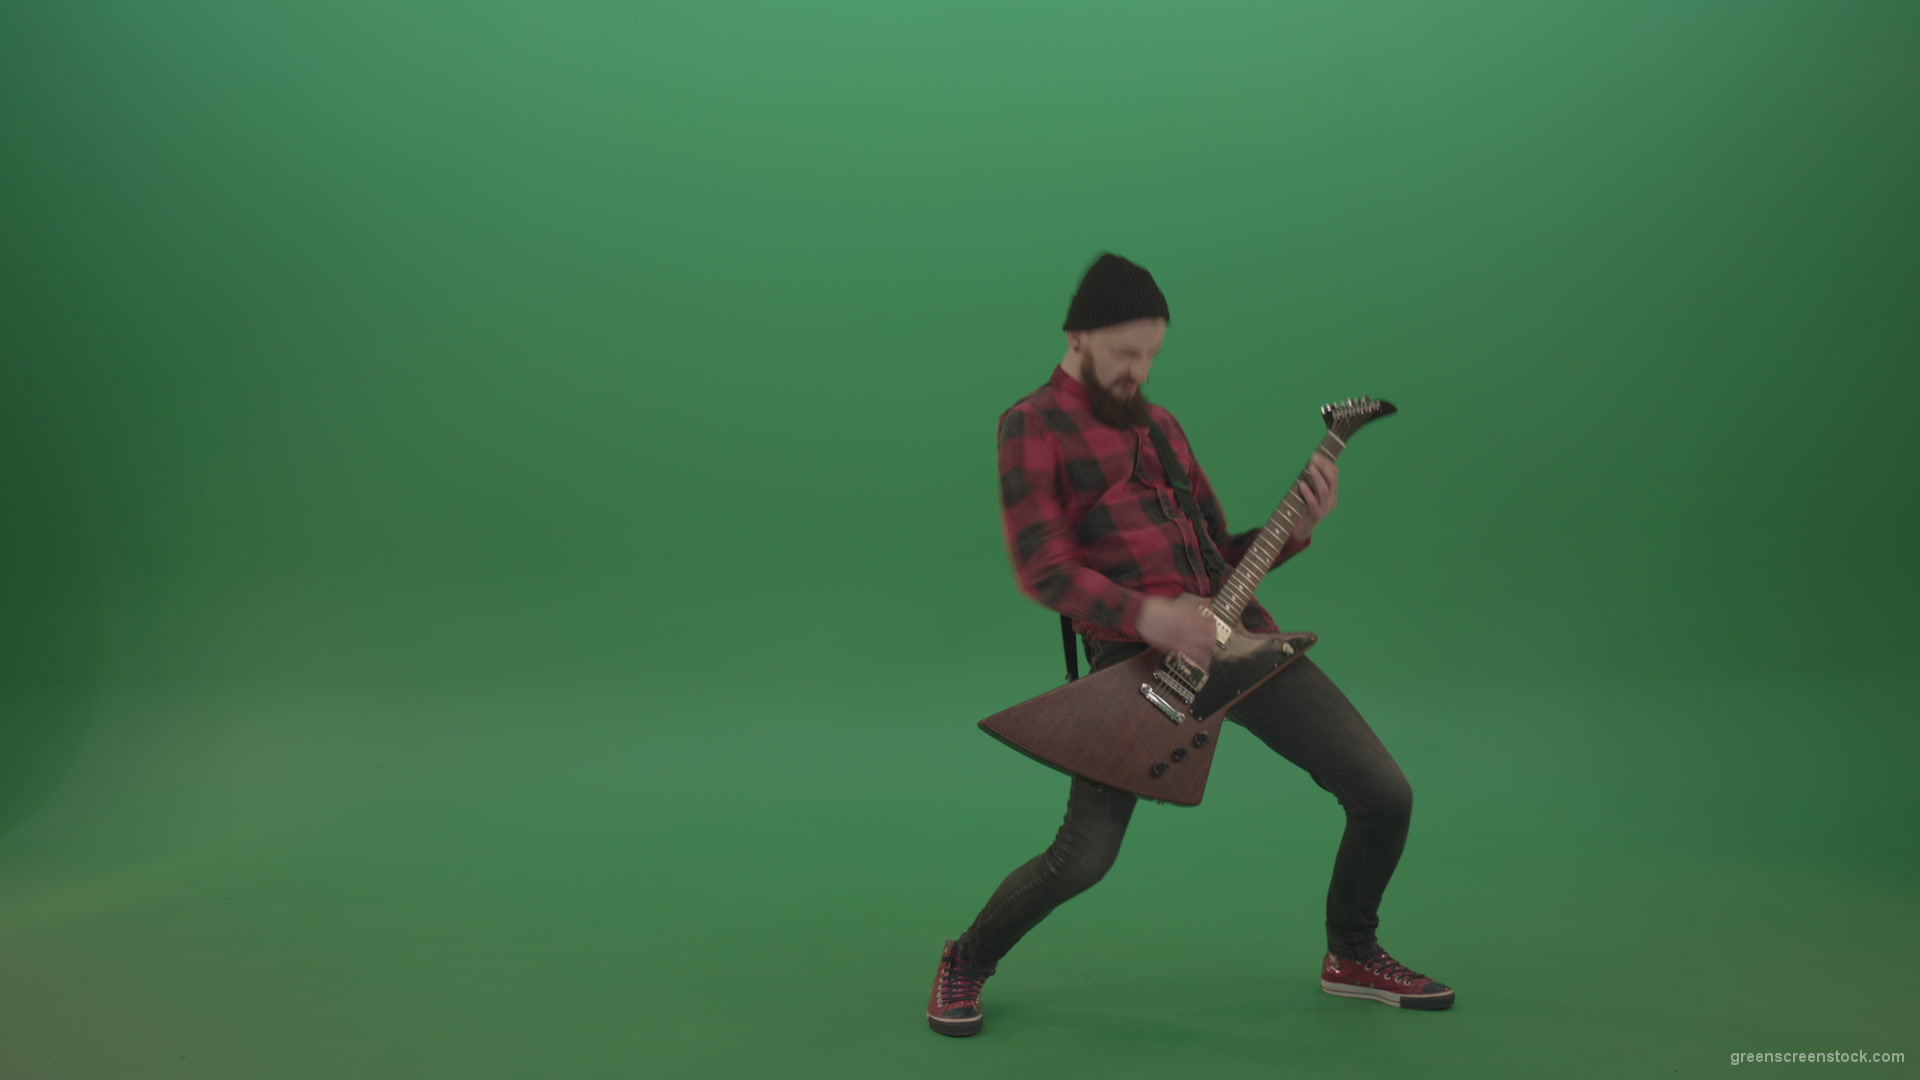 Punk-rock-full-size-man-guitarist-play-guitar-with-emotions-on-green-screen_006 Green Screen Stock